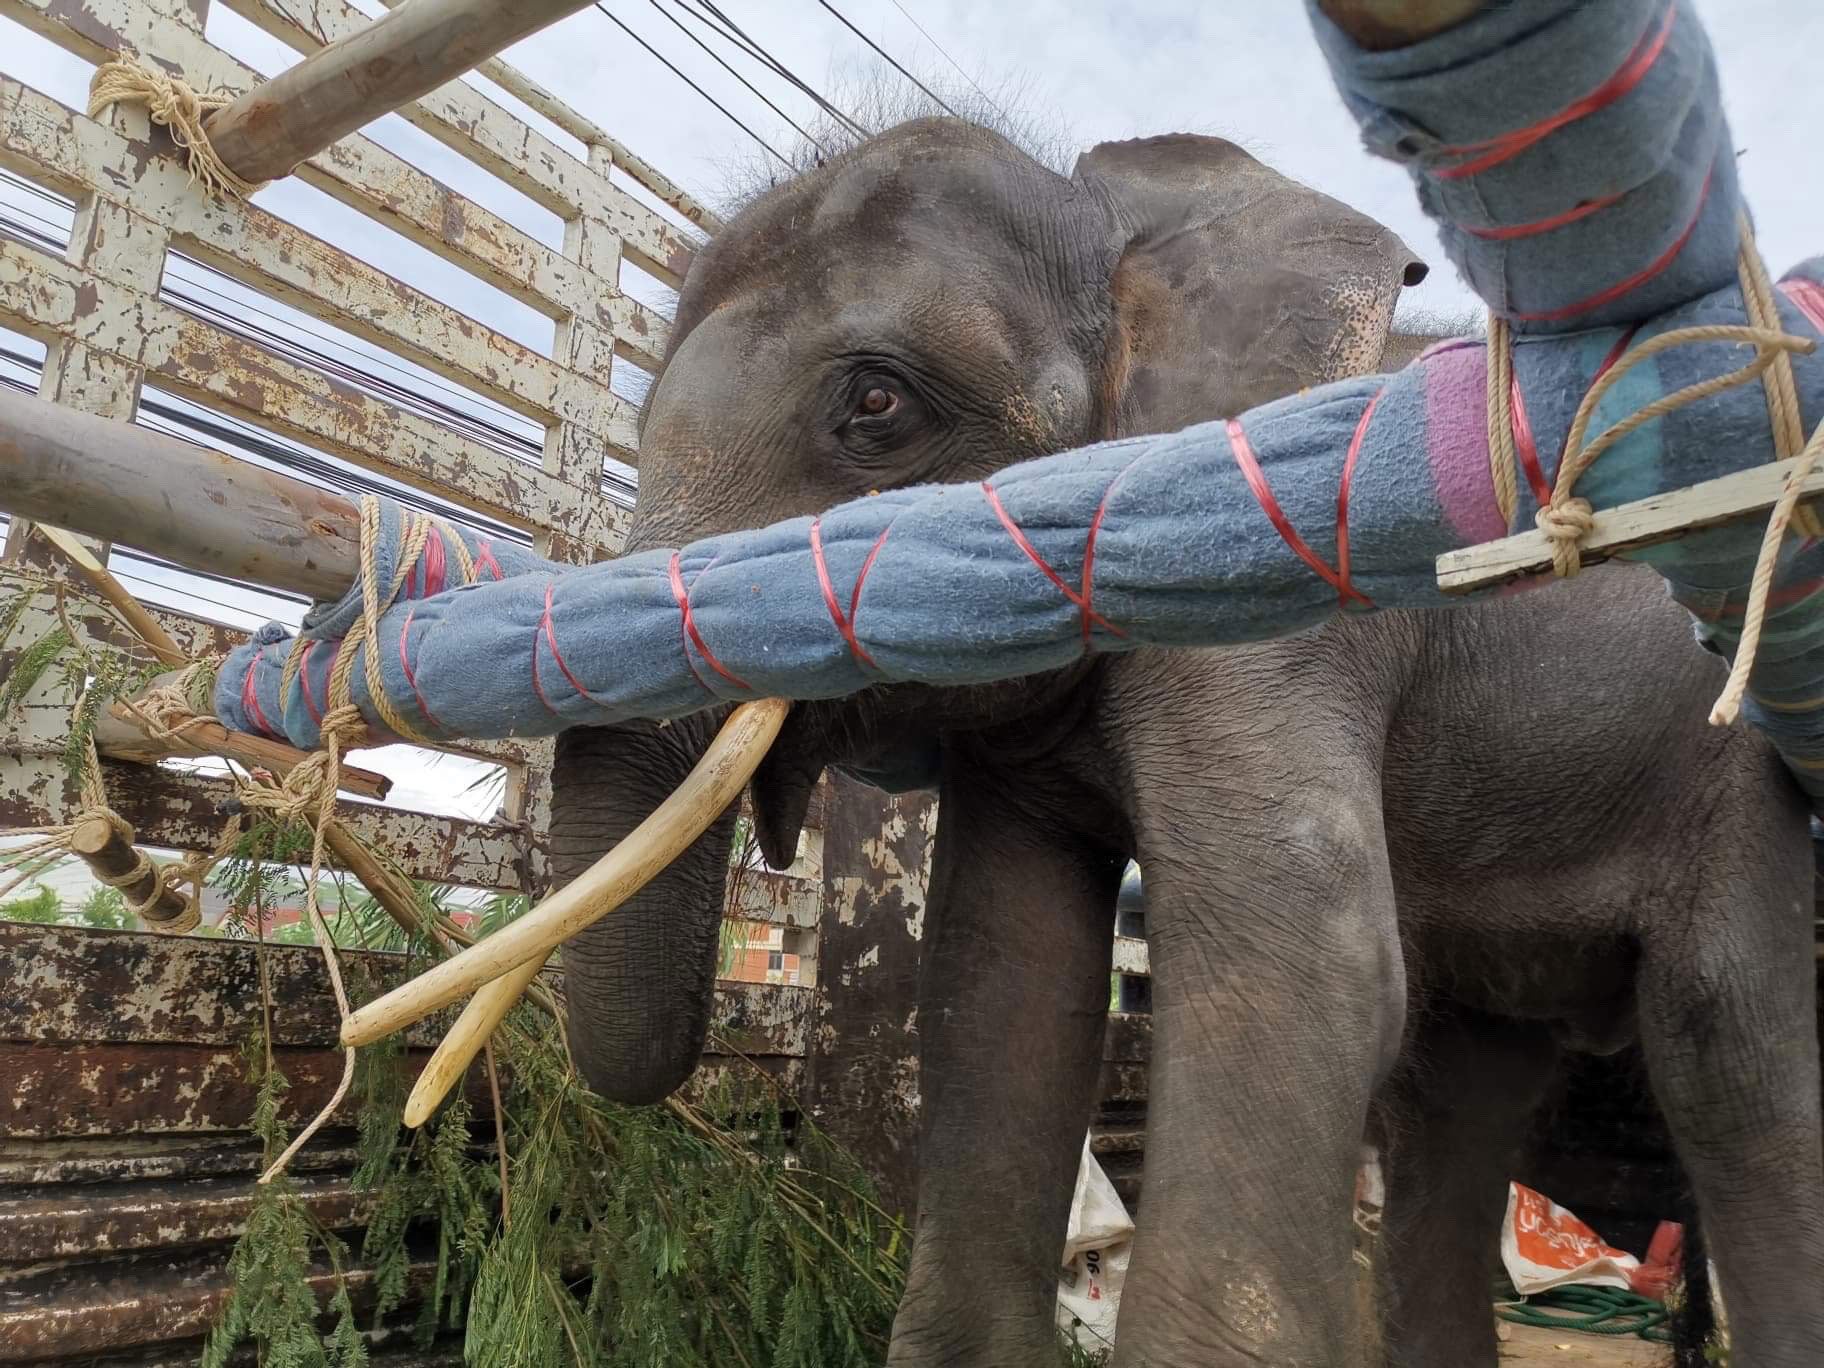 Chained & Injured Elephant Finally Gets Happy Ending When He Is Rescued From Cramped Enclosure - WORLD OF BUZZ 1